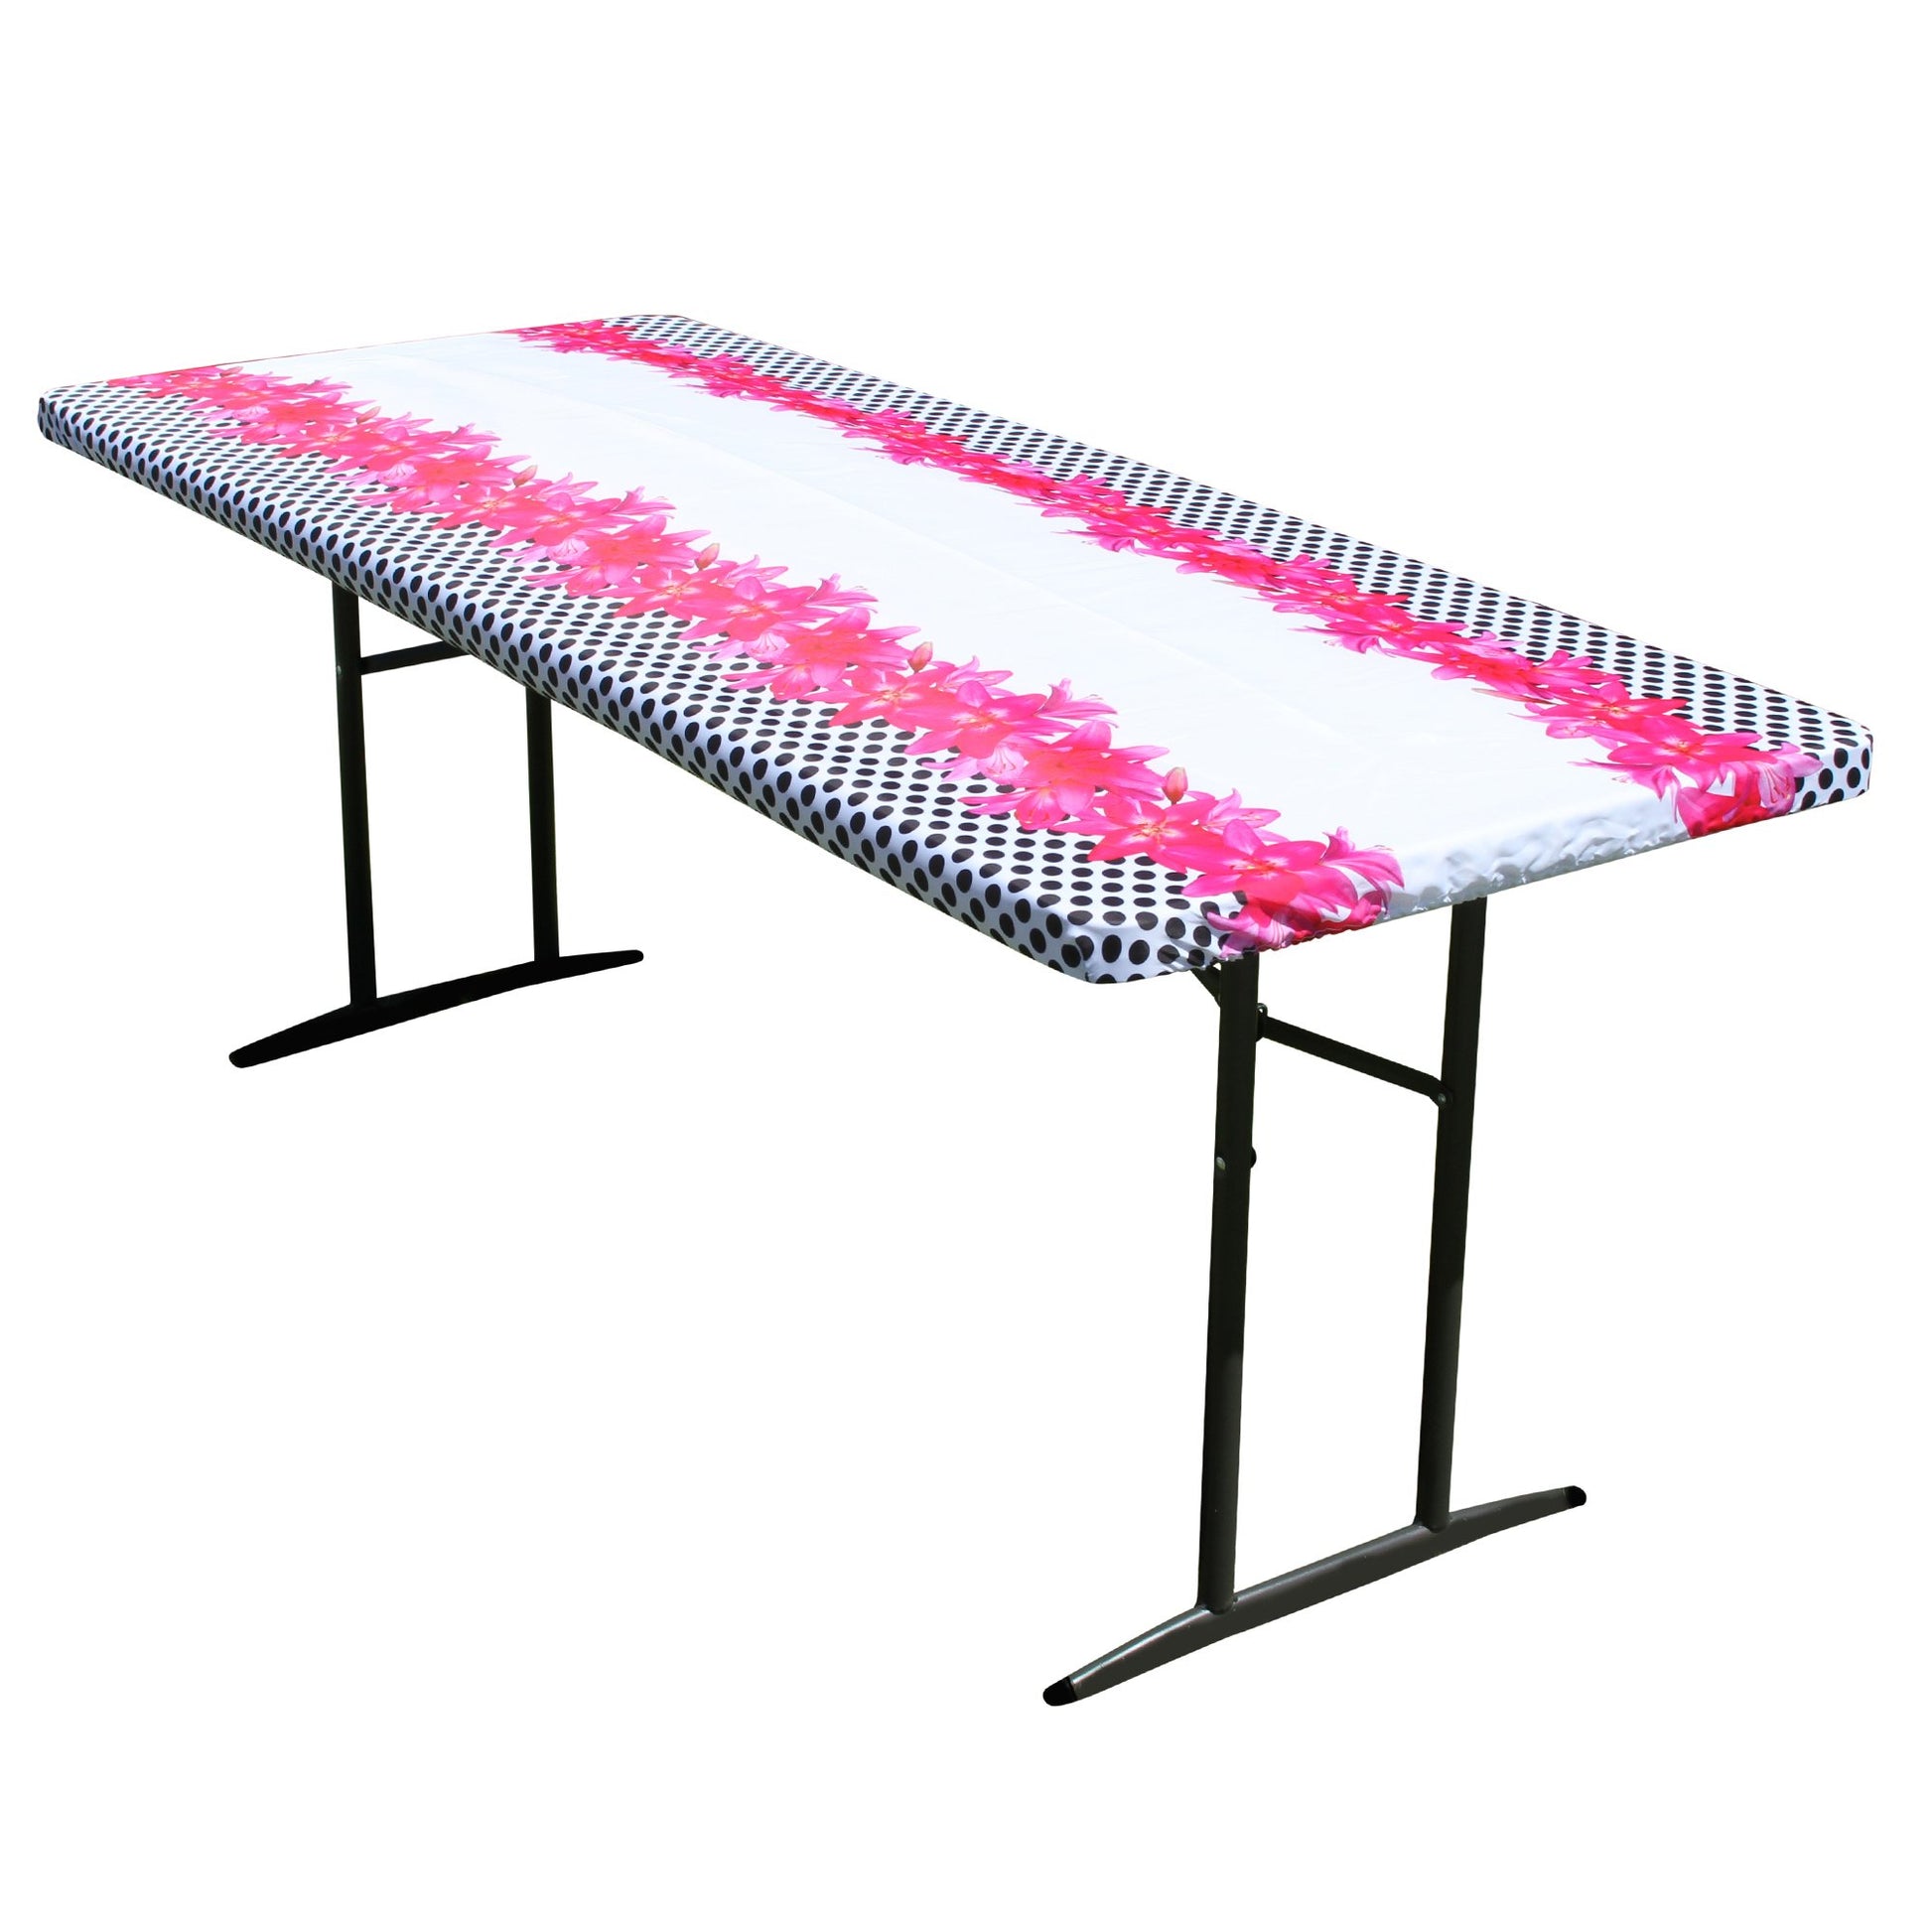 TableCloth PLUS 72" Lilies Fitted Polyester Tablecloth for 6' Folding Tables displayed adorning a folding table